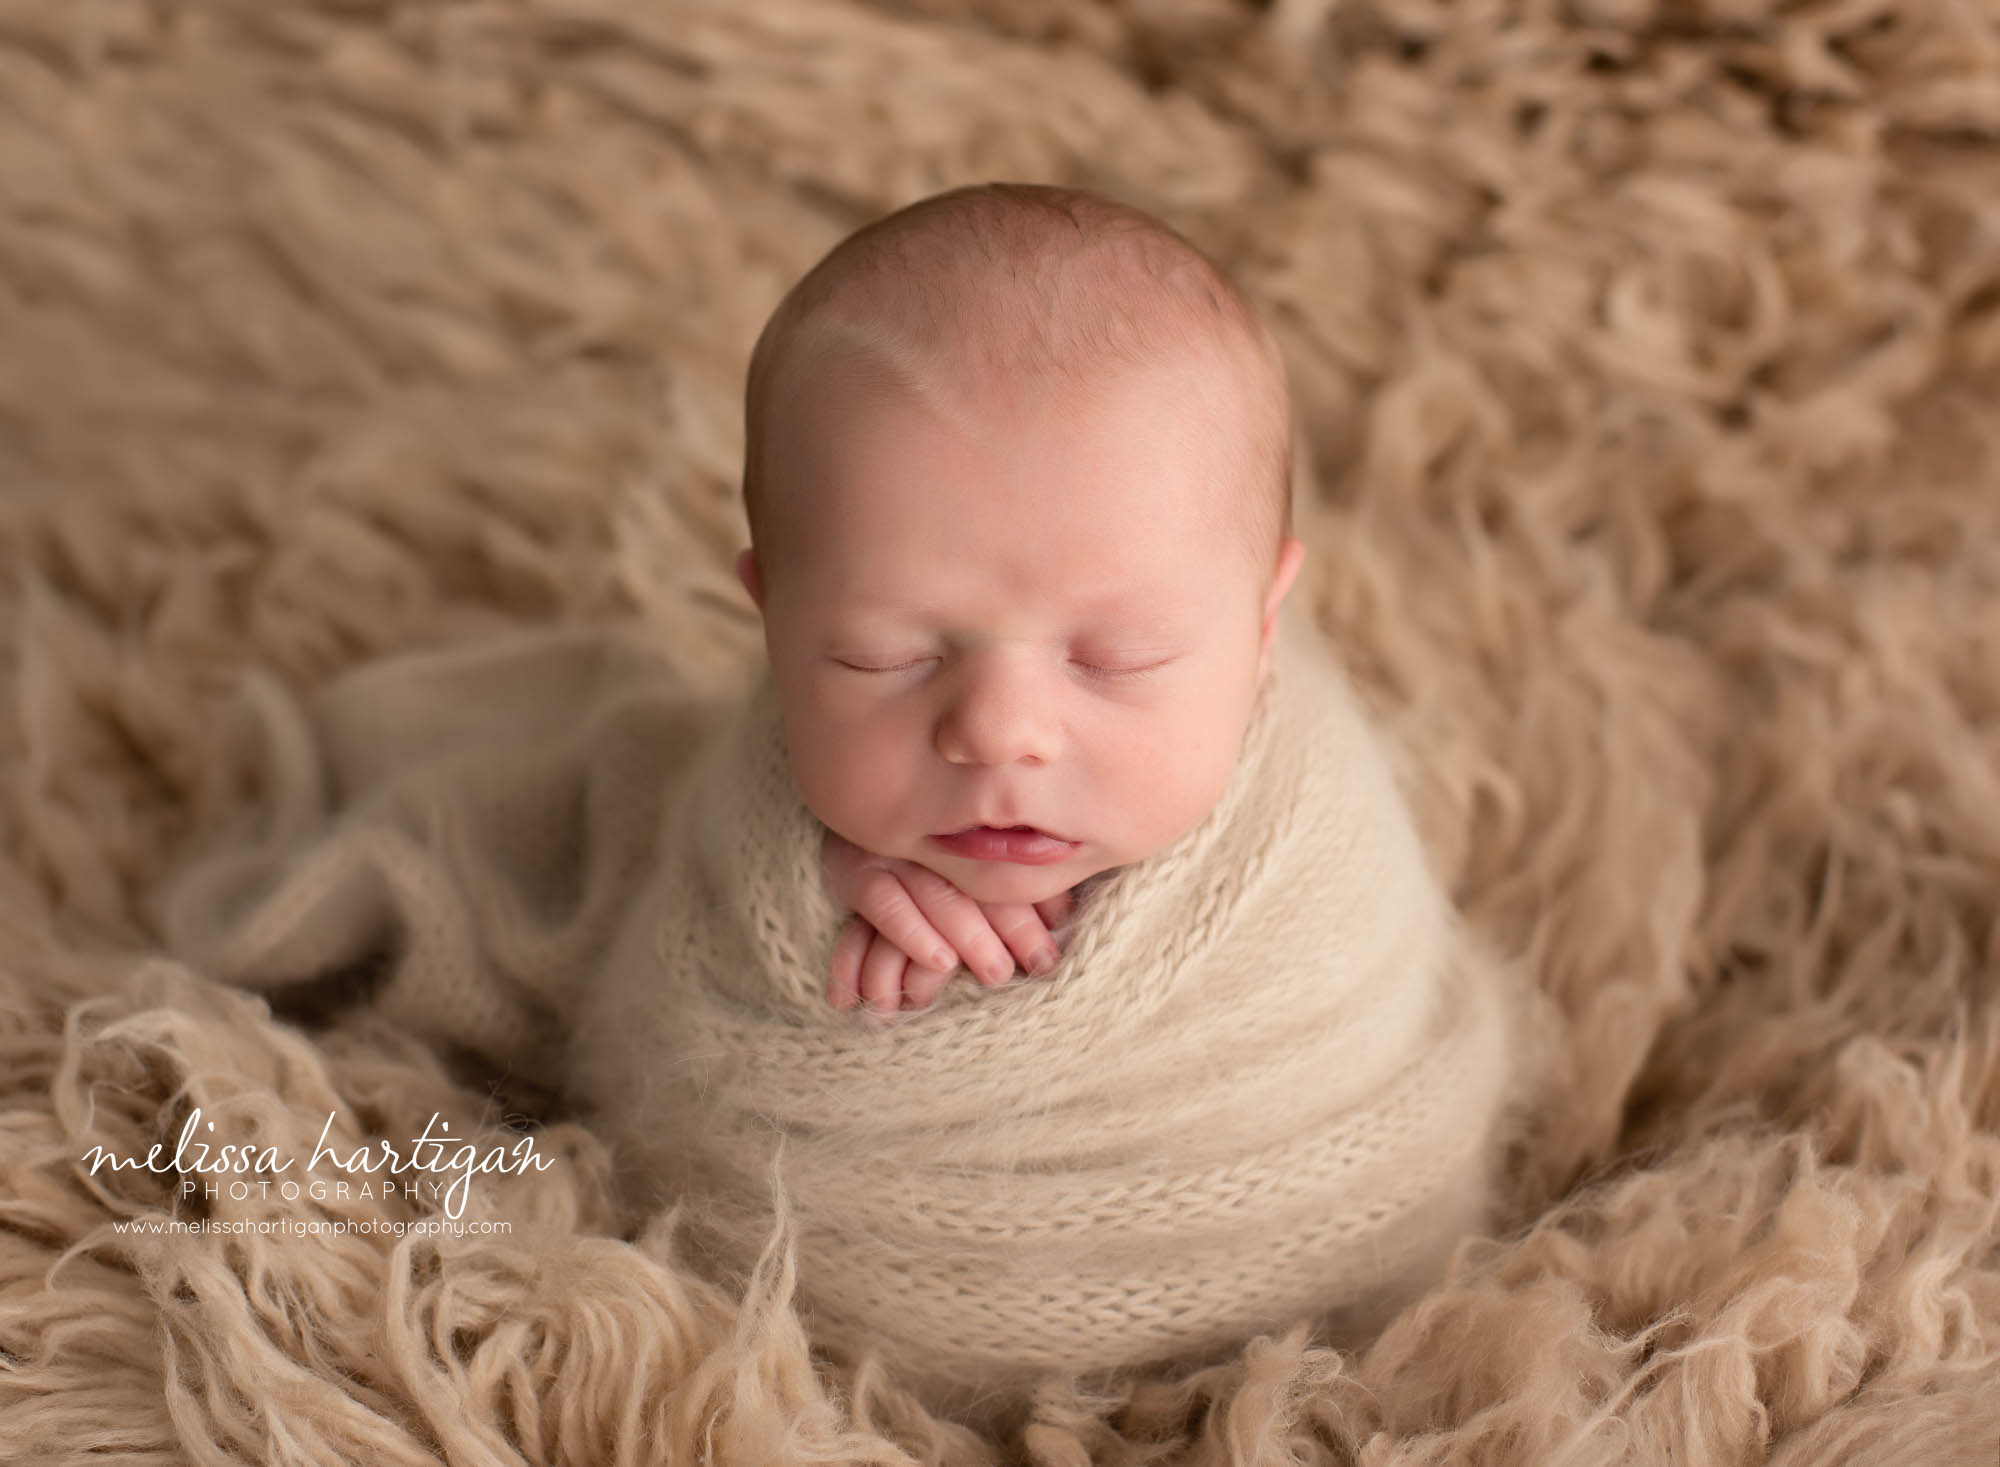 newborn baby boy posed on flokati rug light caramel color with tan knitted wrap